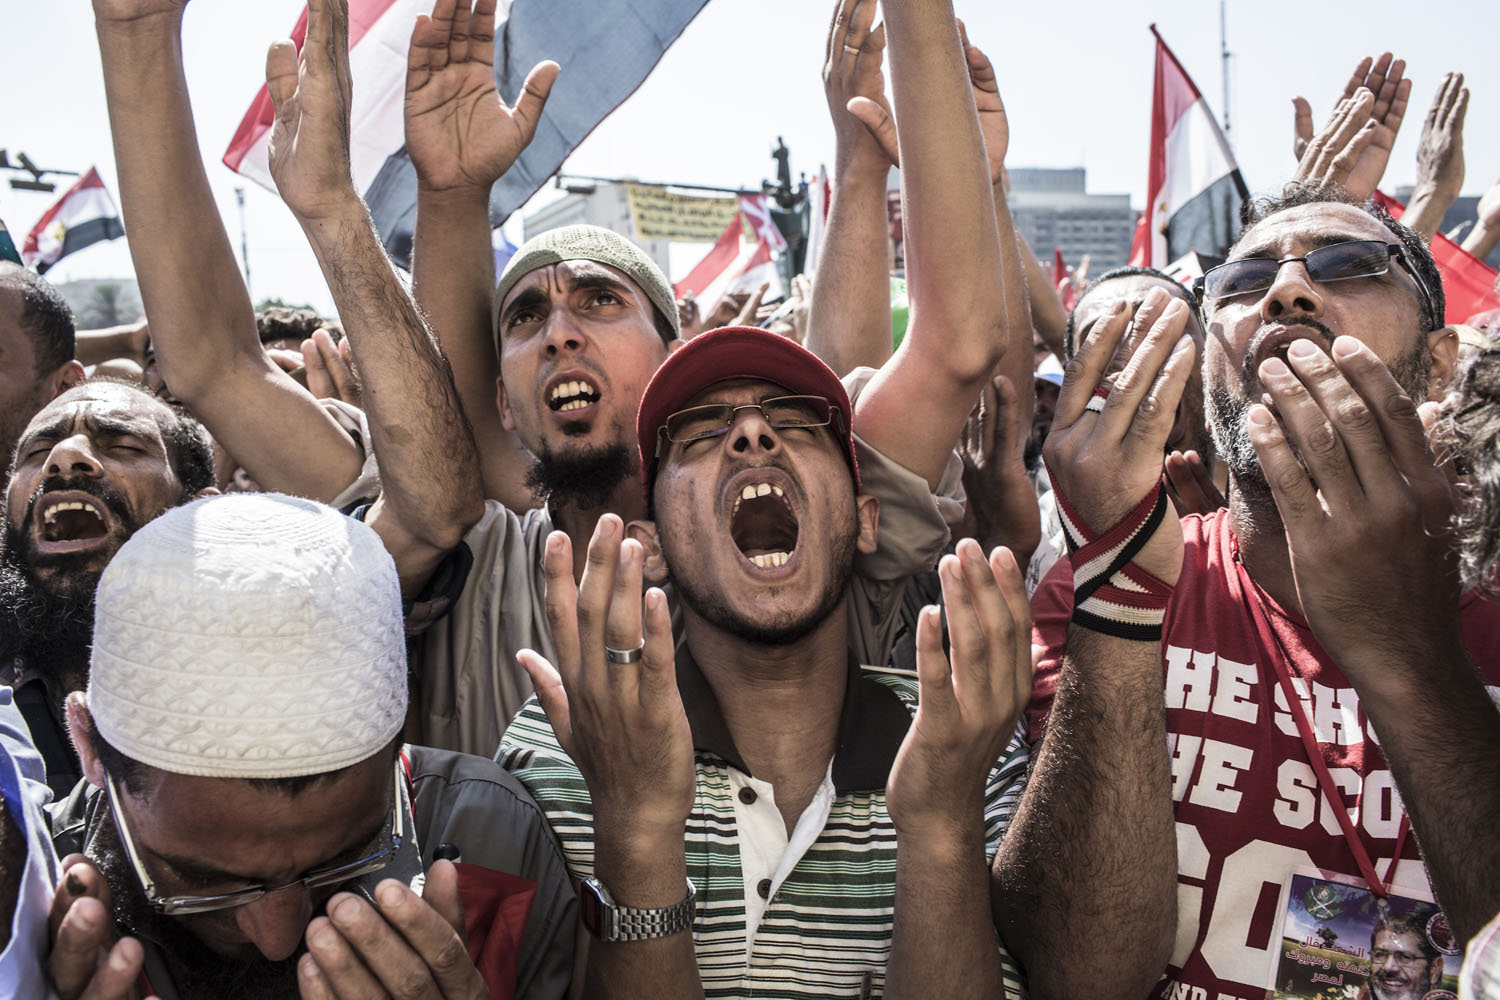 June 24, 2012, Cairo. Egyptians pray as they celebrate the election of Mohamed Morsy in Tahrir Square.